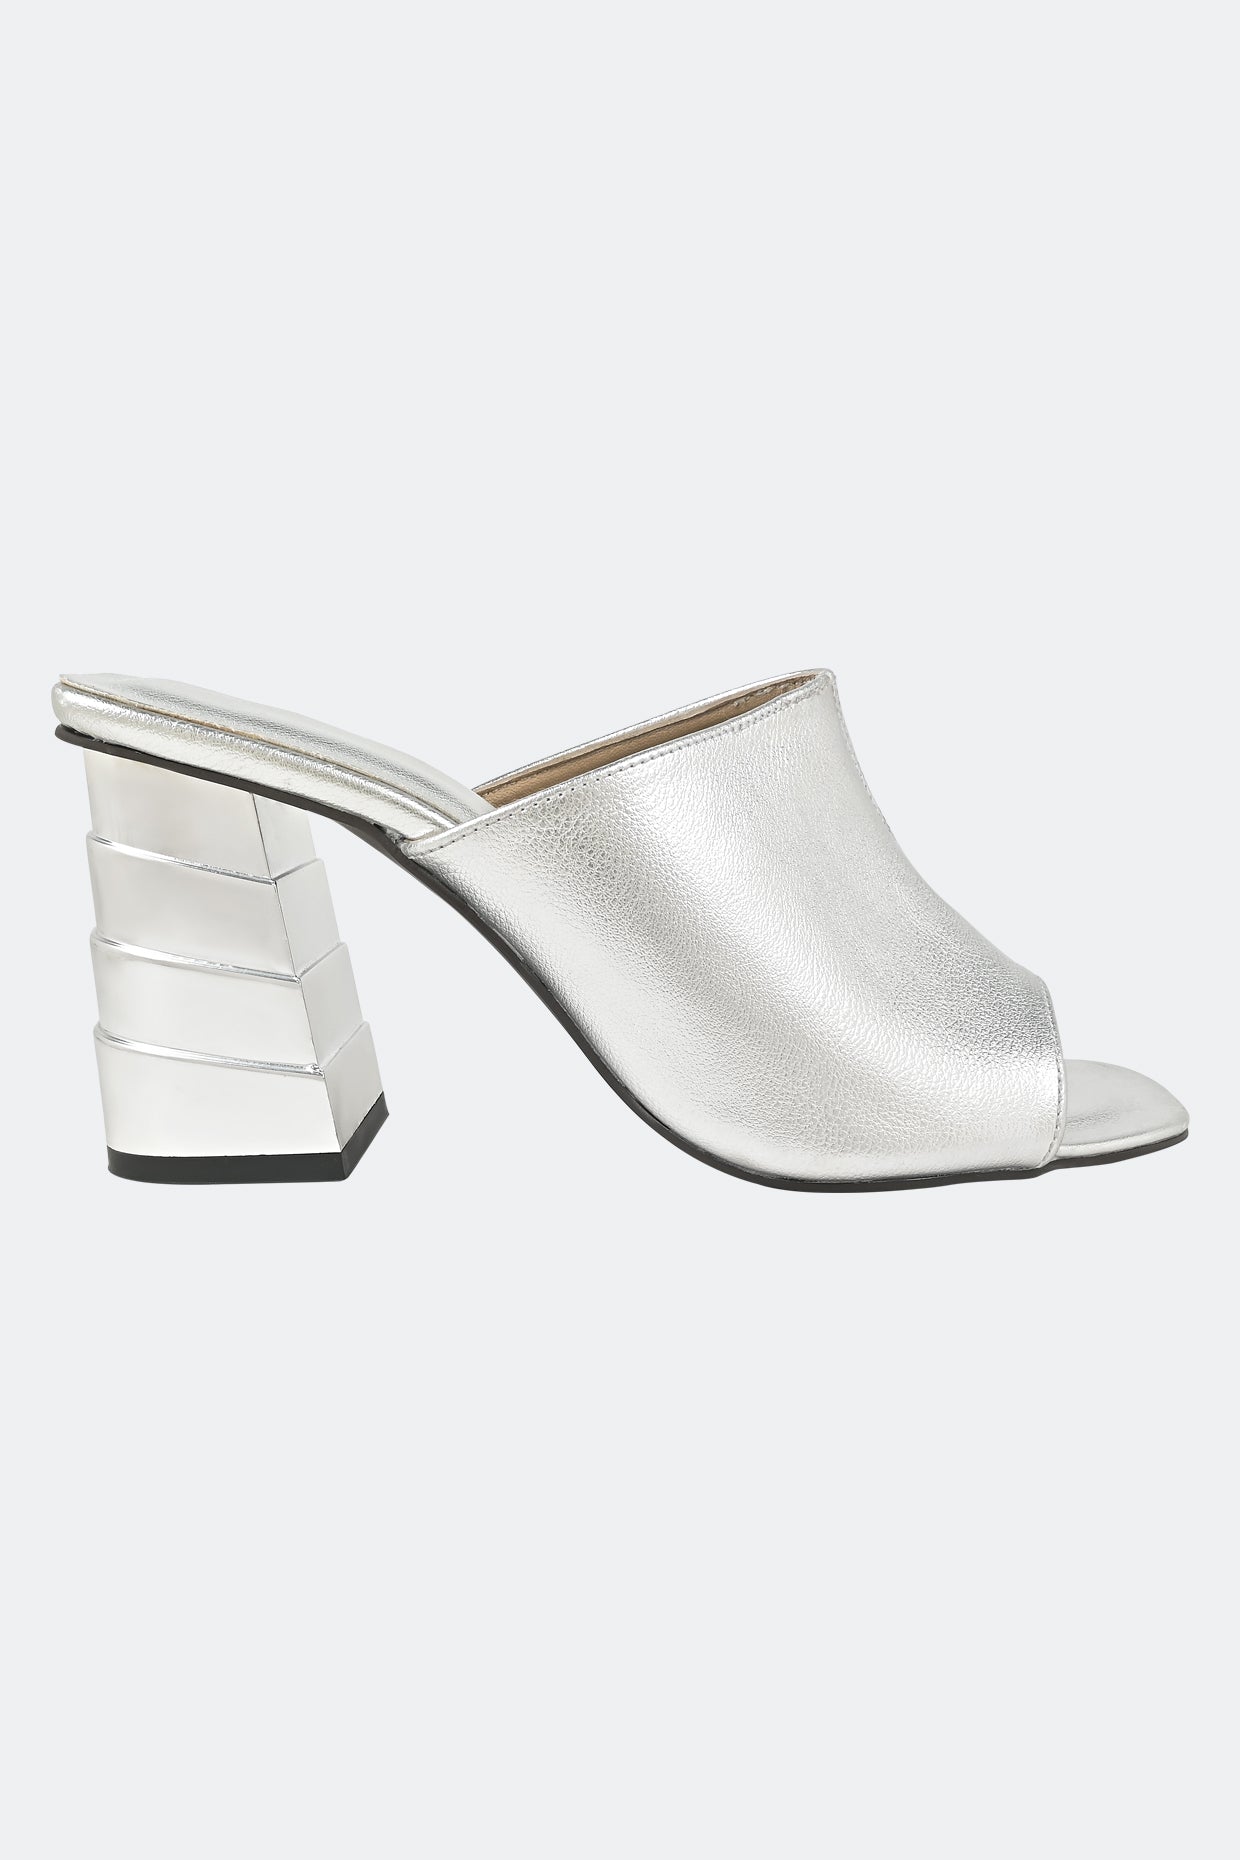 Silver Mules For Women